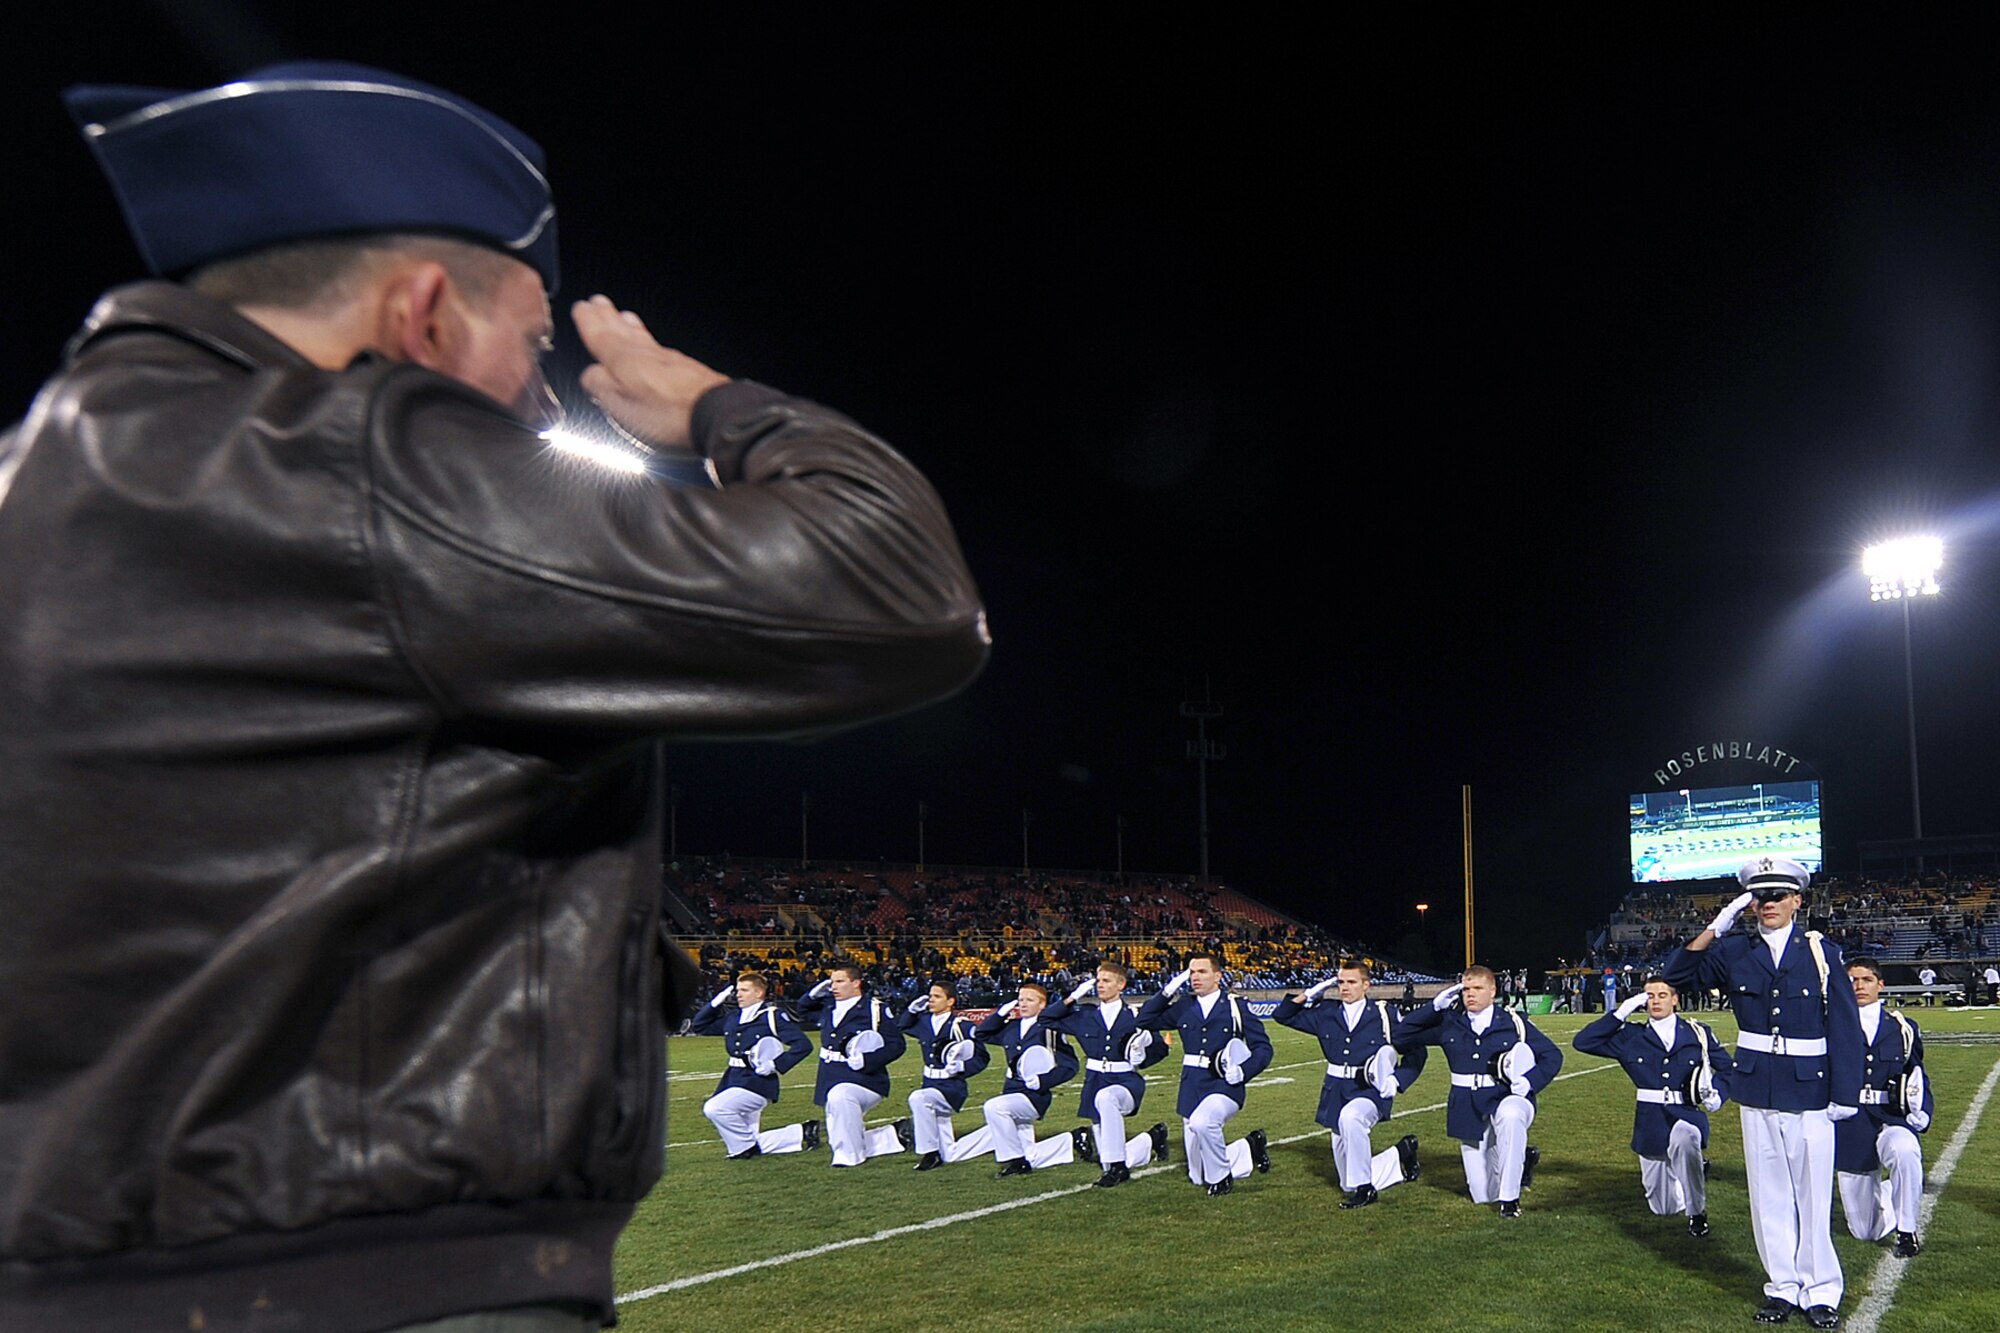 OFFUTT AIR FORCE BASE, Neb. - The Bellevue West High School Air Force Junior ROTC drill team salutes Brig. Gen. John N.T. Shanahan, 55th Wing commander, before exiting the football  field during the Omaha Nighthawks military appreciation game at the Rosenblatt Stadium Nov. 19. Military members from all branches were celebrated at the game, which ended with a Florida Tuskers win 27 to 10.U.S. Air Force Photo by Charles Haymond (Released) 